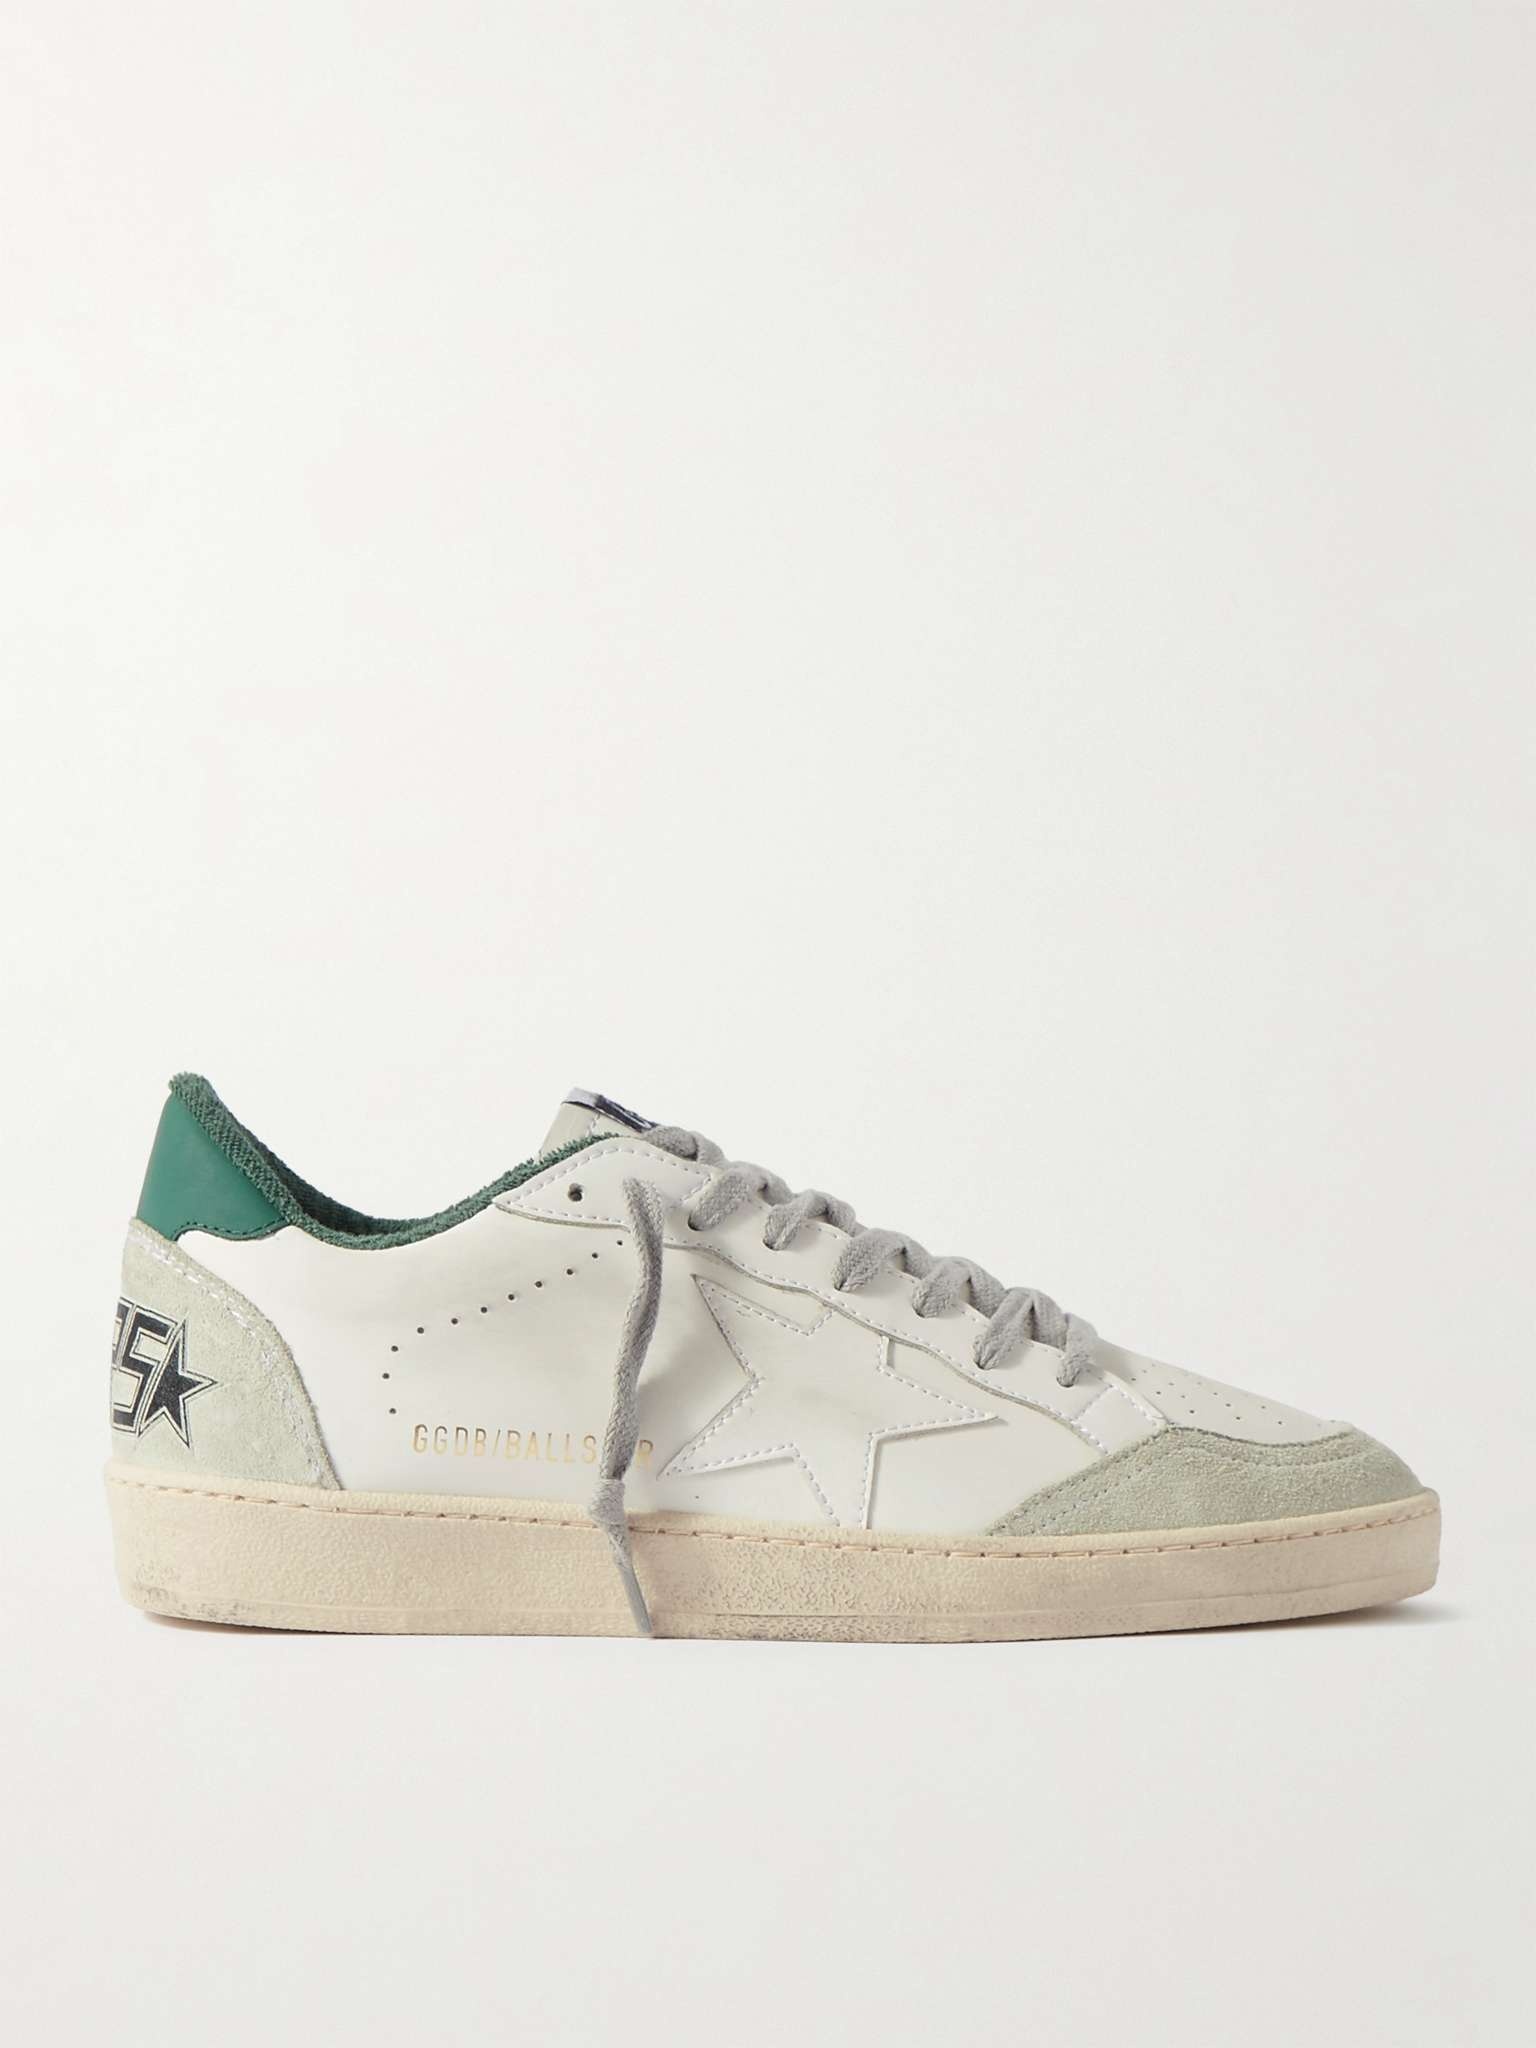 Ball Star Distressed Suede-Trimmed Leather Sneakers - 1